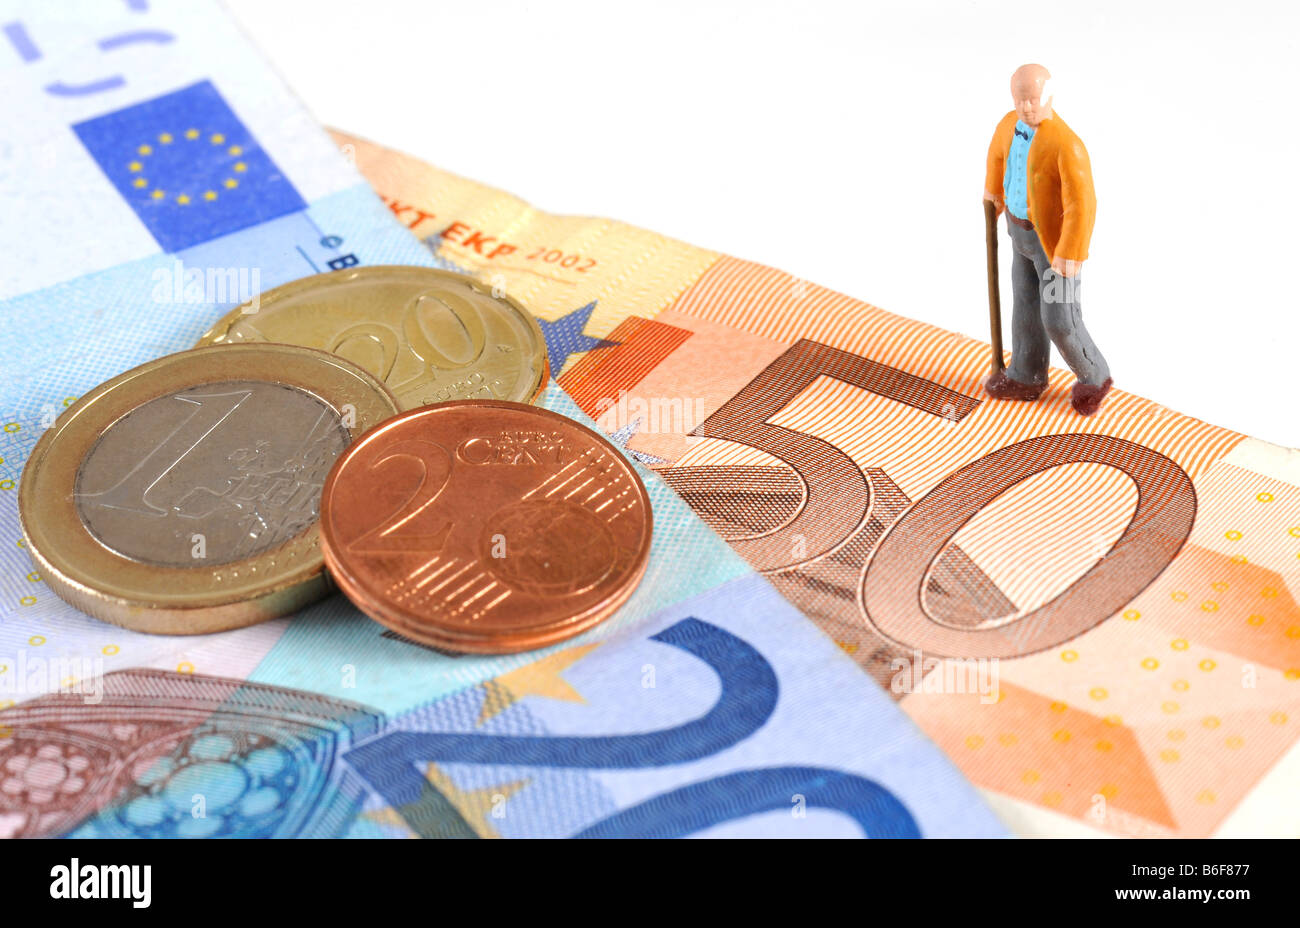 Senior citizen figure walking over a Euro bank notes and coins, symbolizing retirement Stock Photo